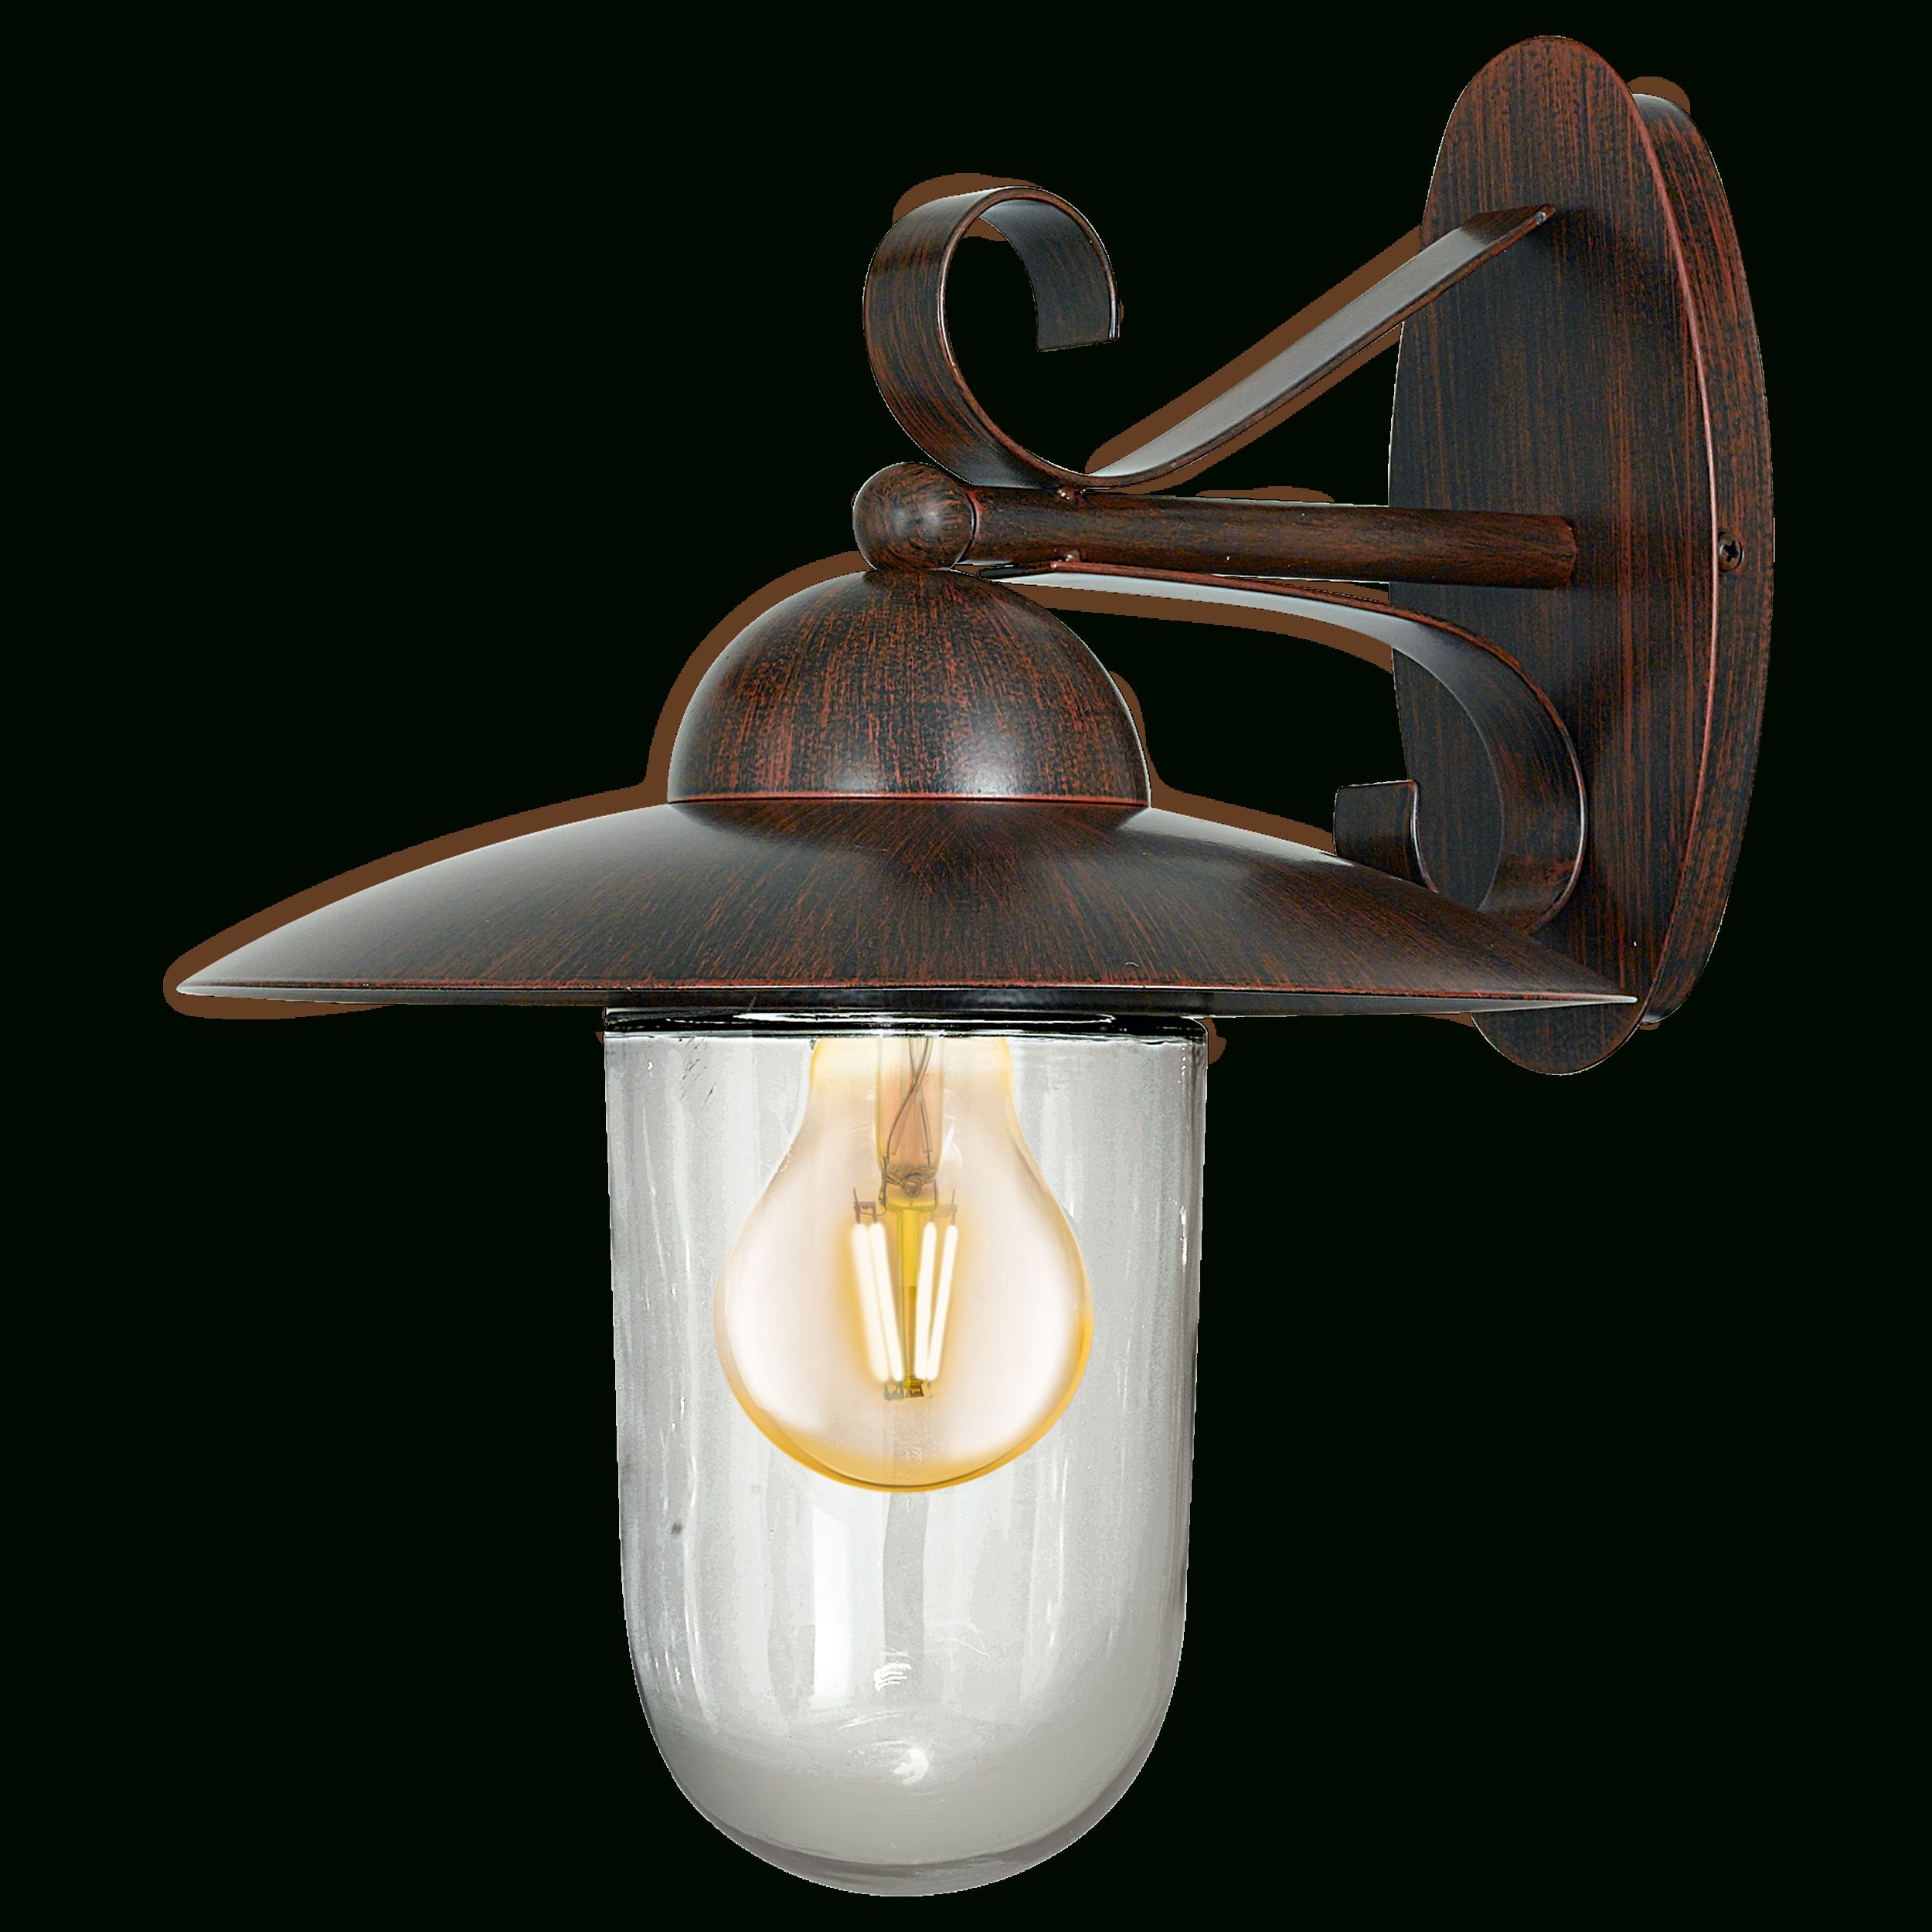 Fashionable 83589 / Milton / Outdoor Lighting / Main Collections / Products Intended For Eglo Outdoor Lighting (View 11 of 20)